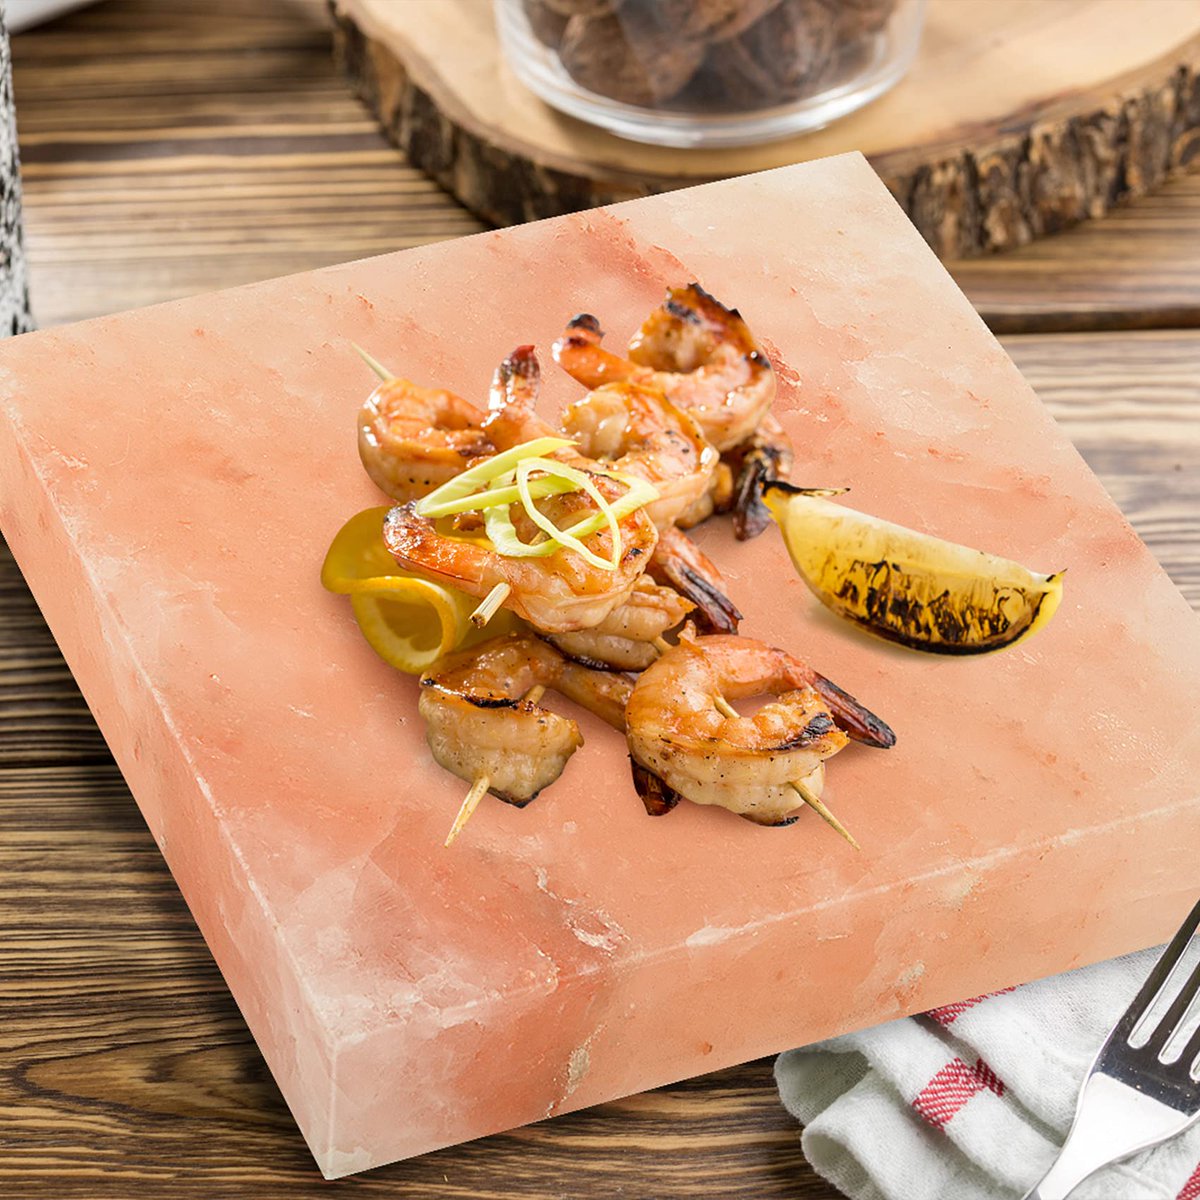 A slab of solid pink Himalayan salt can be used for cooking, grilling, and serving food.
#cookingblock
#Utah 
#himalayanpinksalt